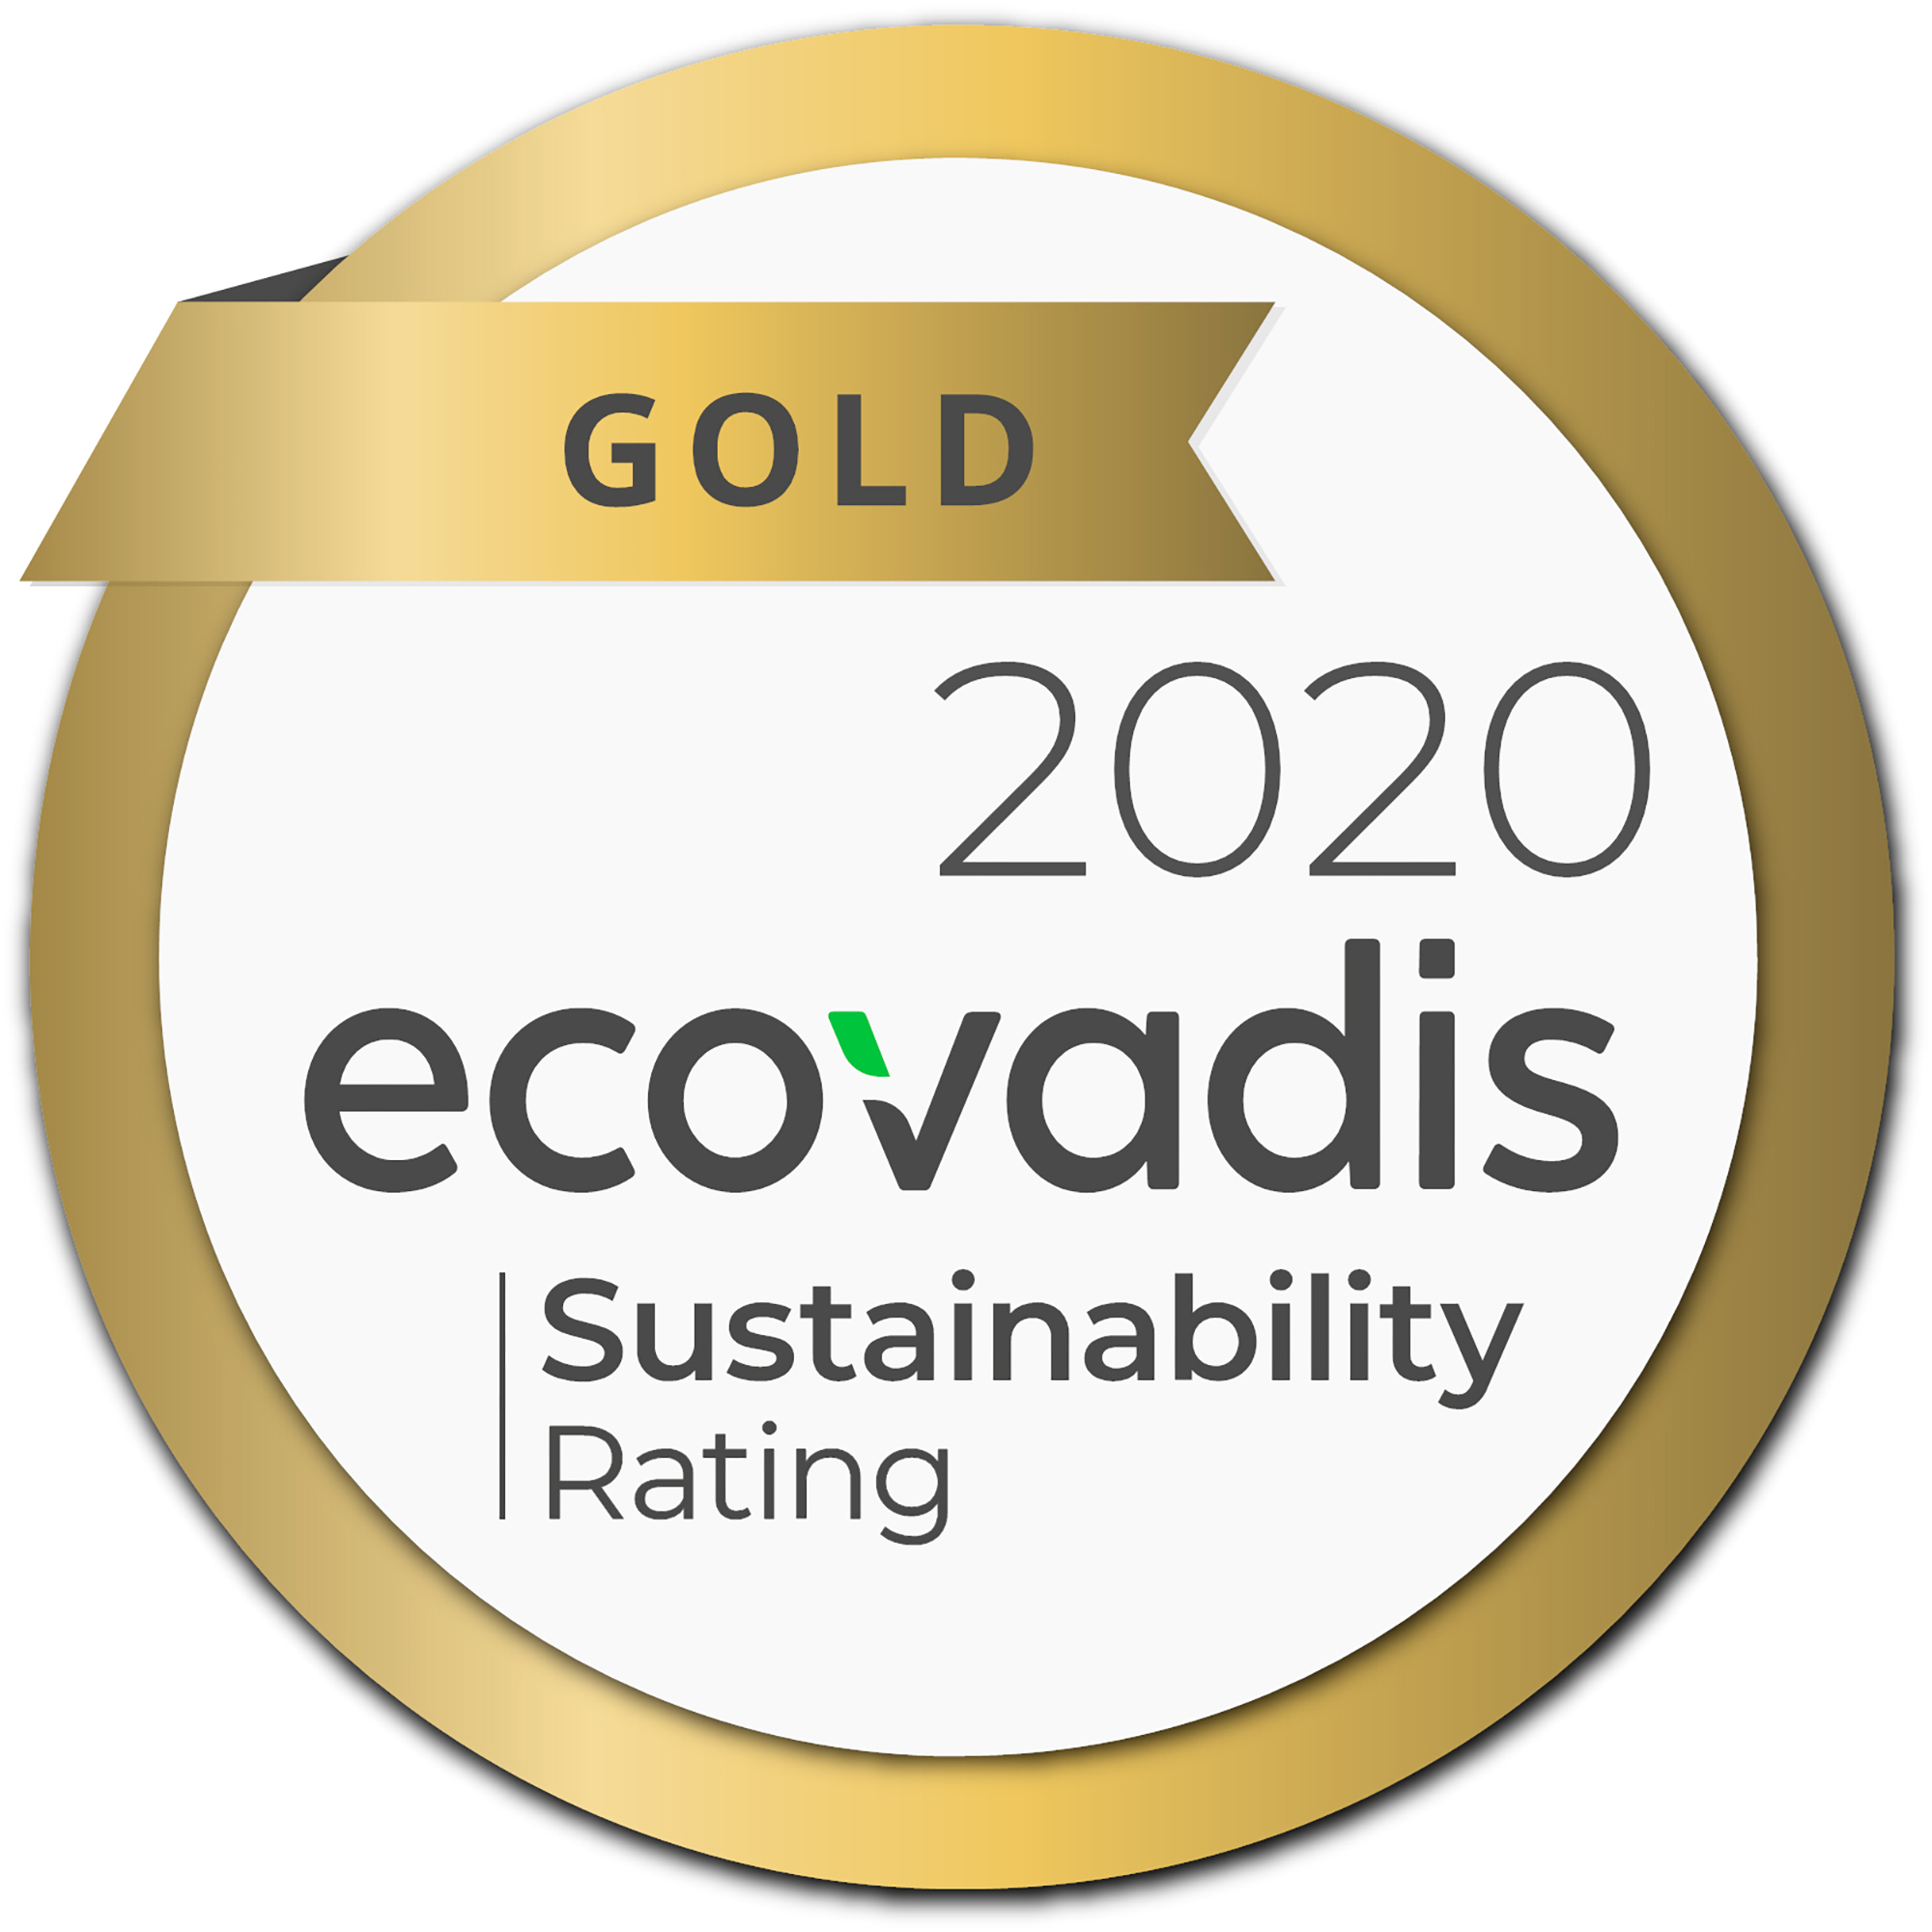 Diamond Packaging Awarded Gold in 2020 EcoVadis Corporate Social Responsibility (CSR) Assessment